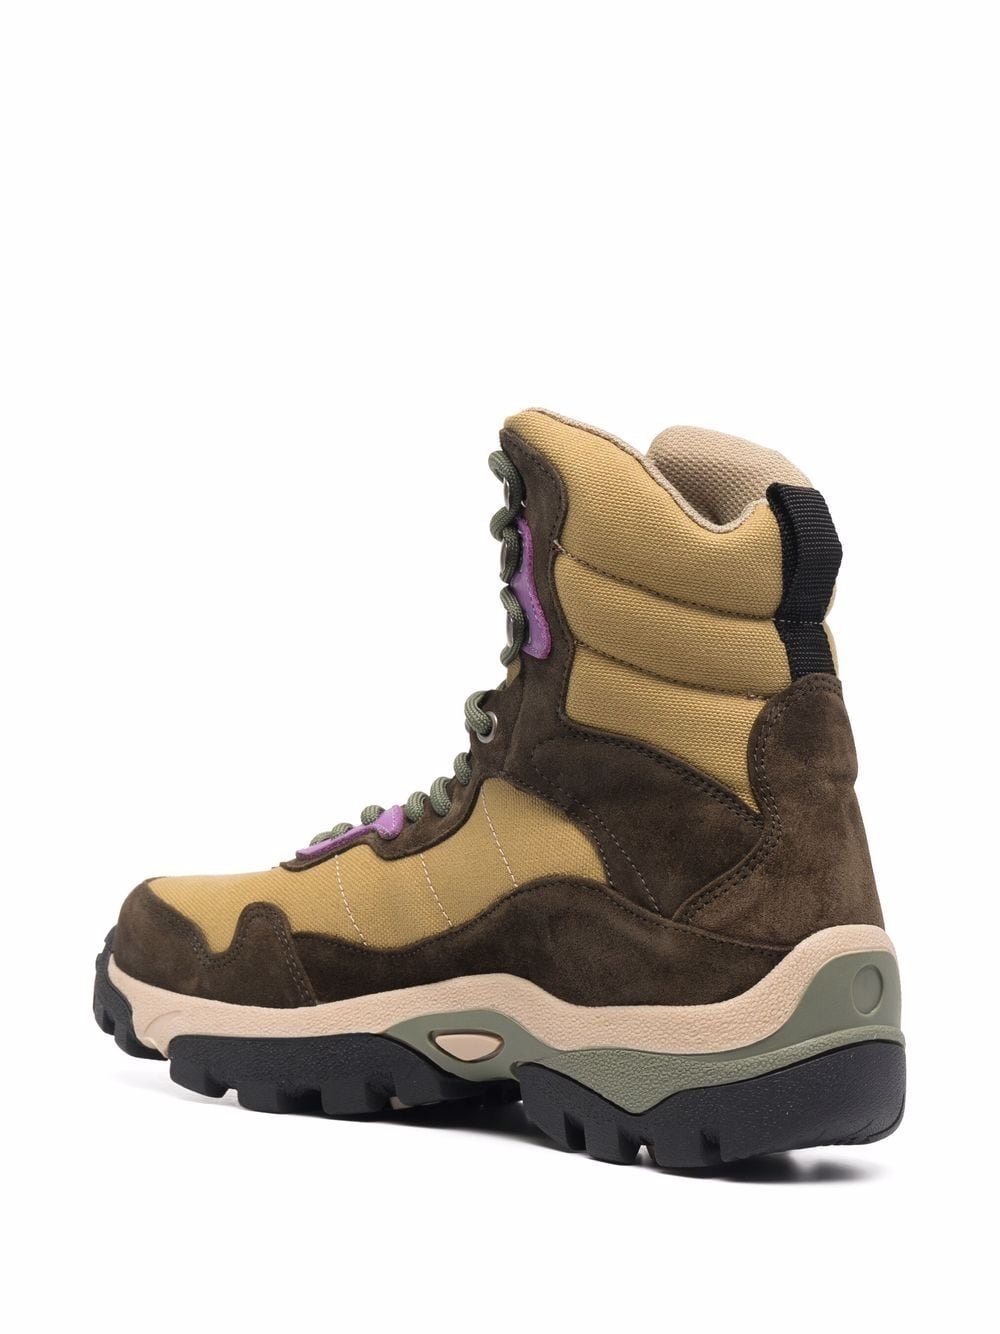 Les Chaussures Terra hiking boots - 3